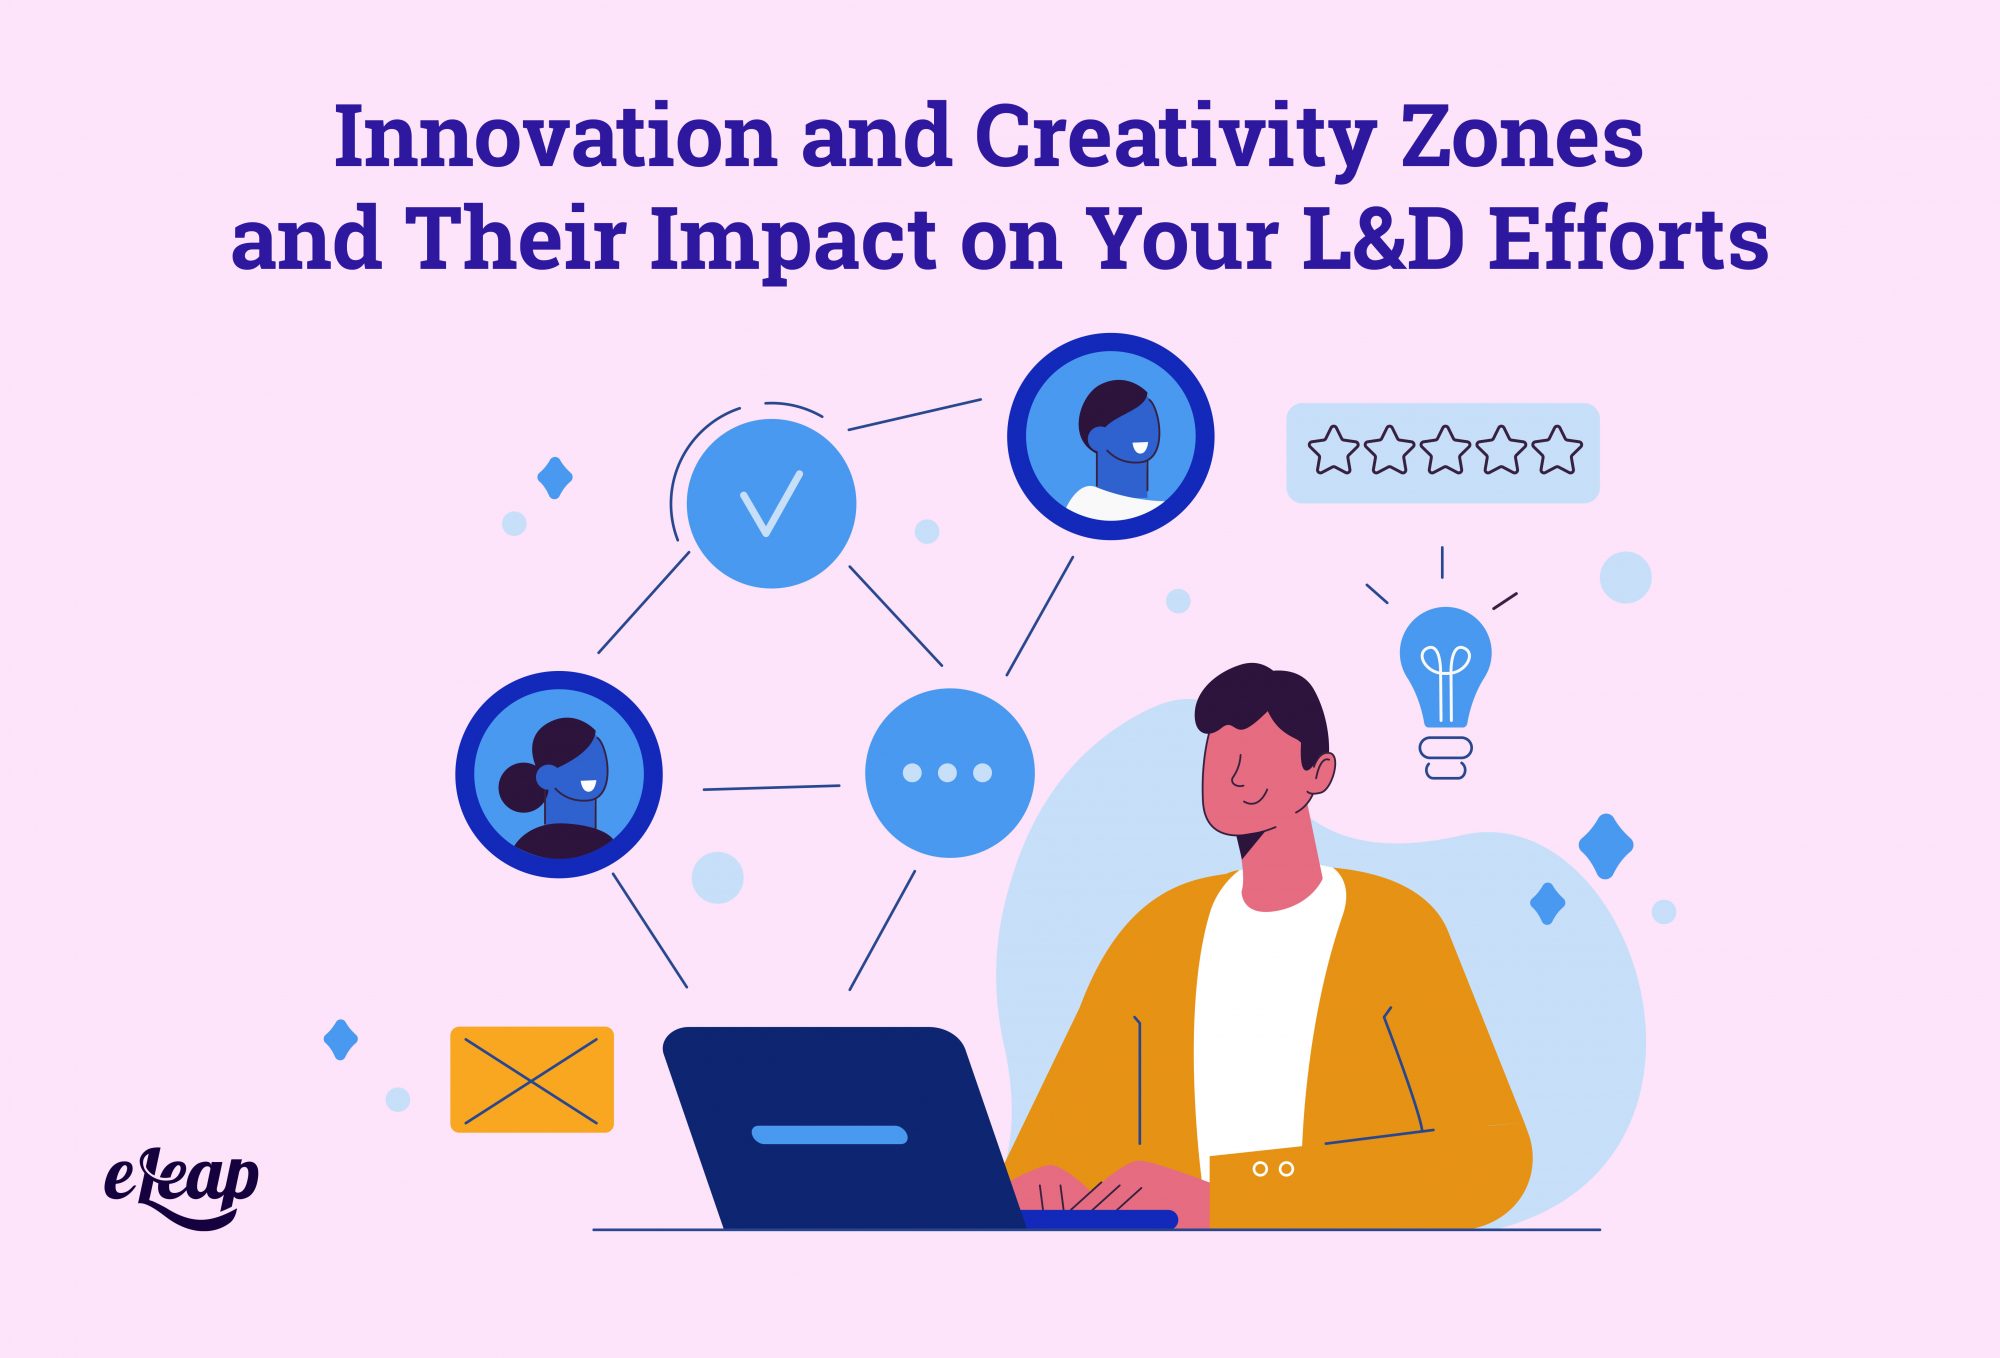 Innovation and Creativity Zones and Their Impact on Your L&D Efforts